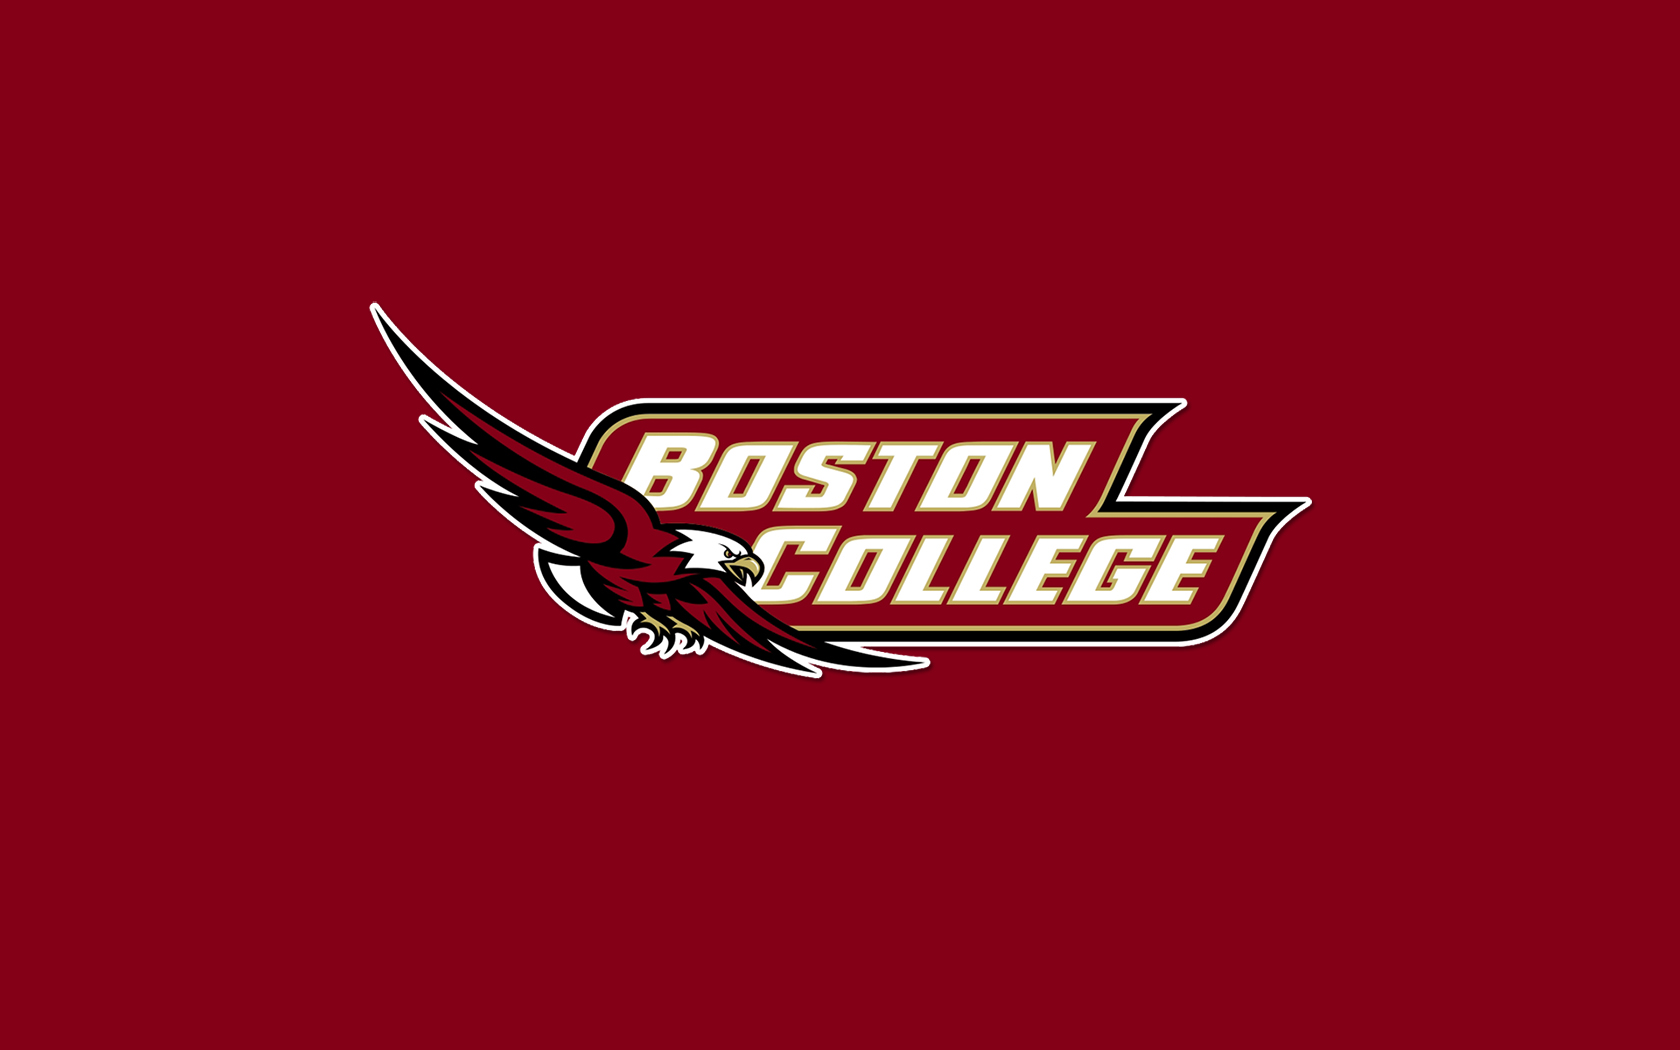 women-s-hoopdirt-latara-king-named-assistant-women-s-basketball-coach-at-boston-college